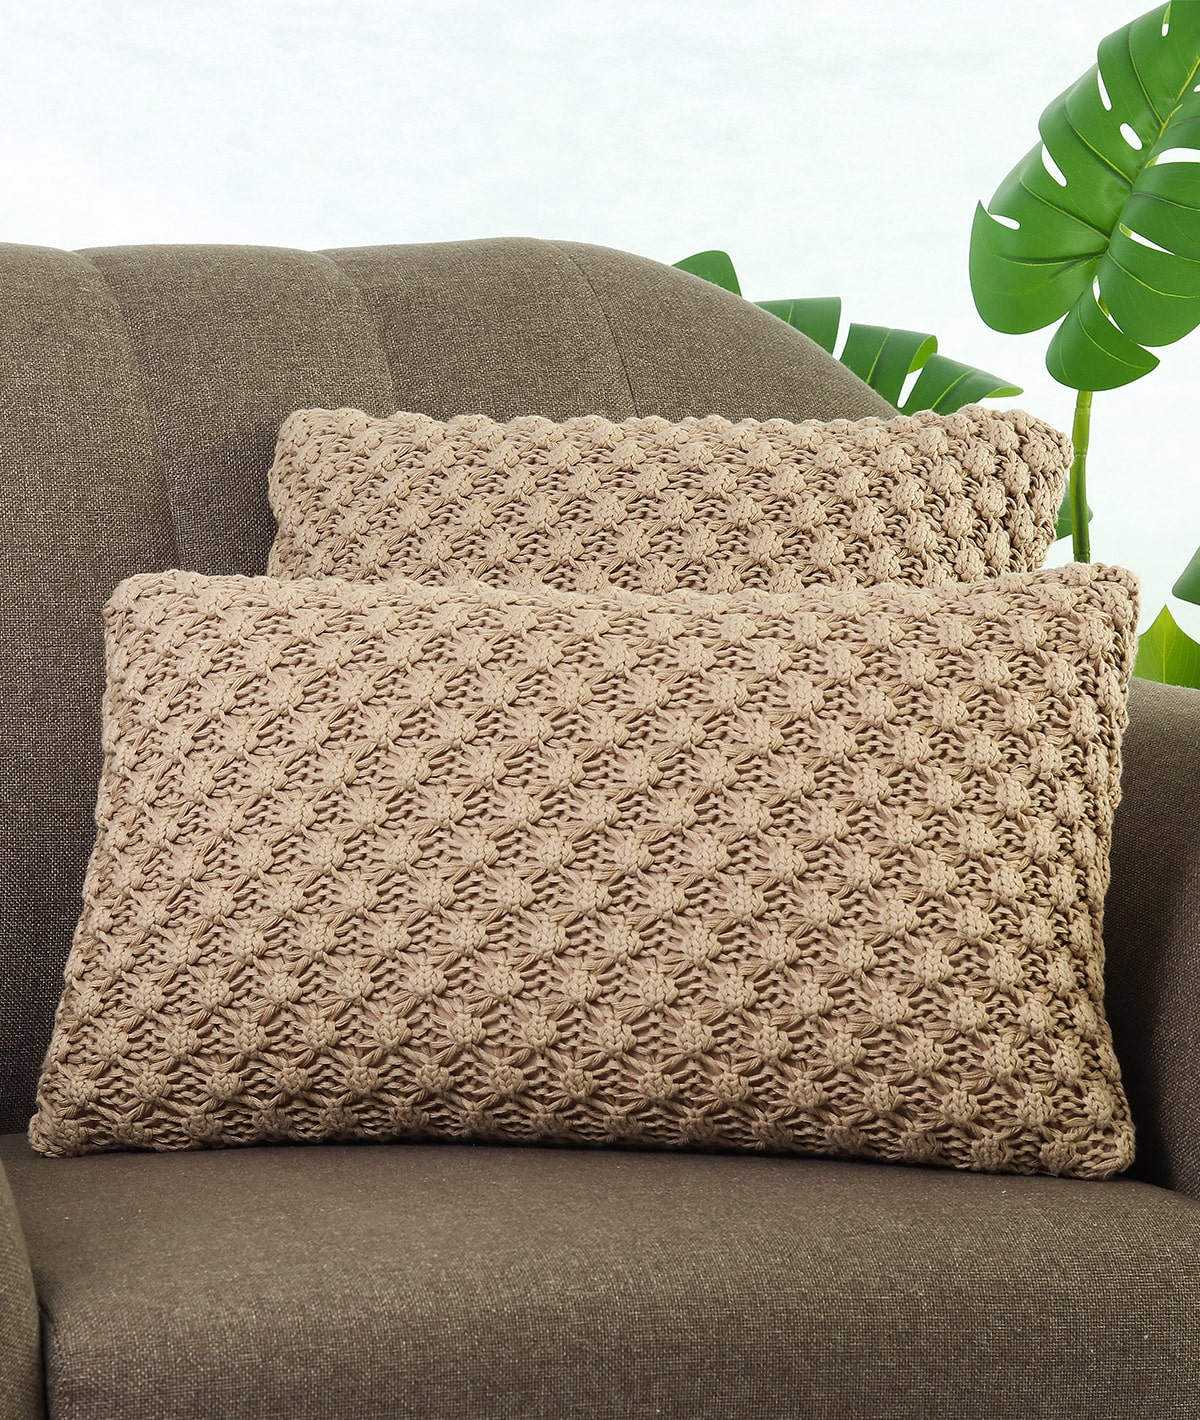 Popcorn Knit Linen Cotton Knitted Decorative 16 X 16 Inches Cushion Cover